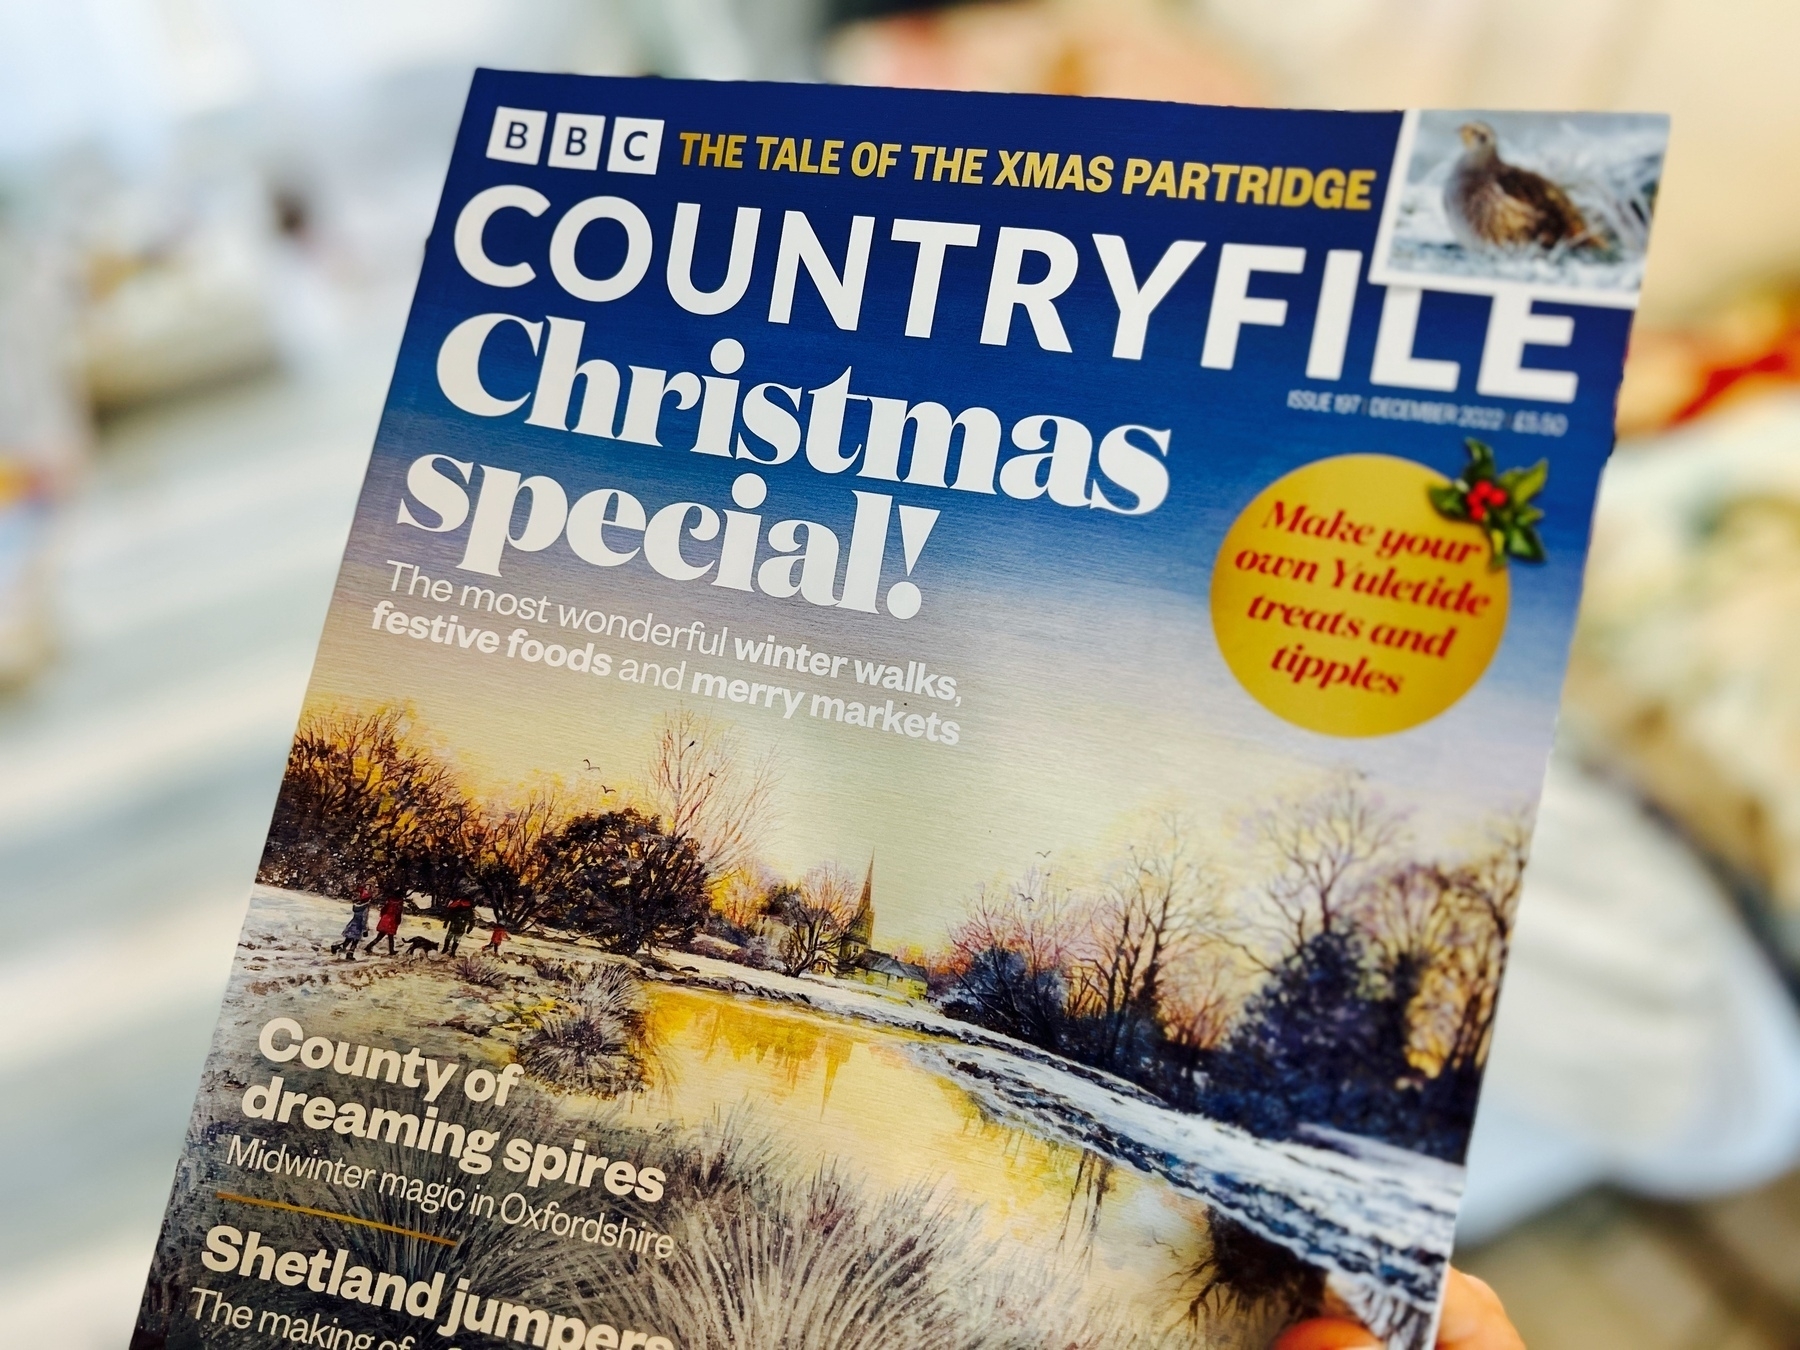 The Countryfile Christmas issue